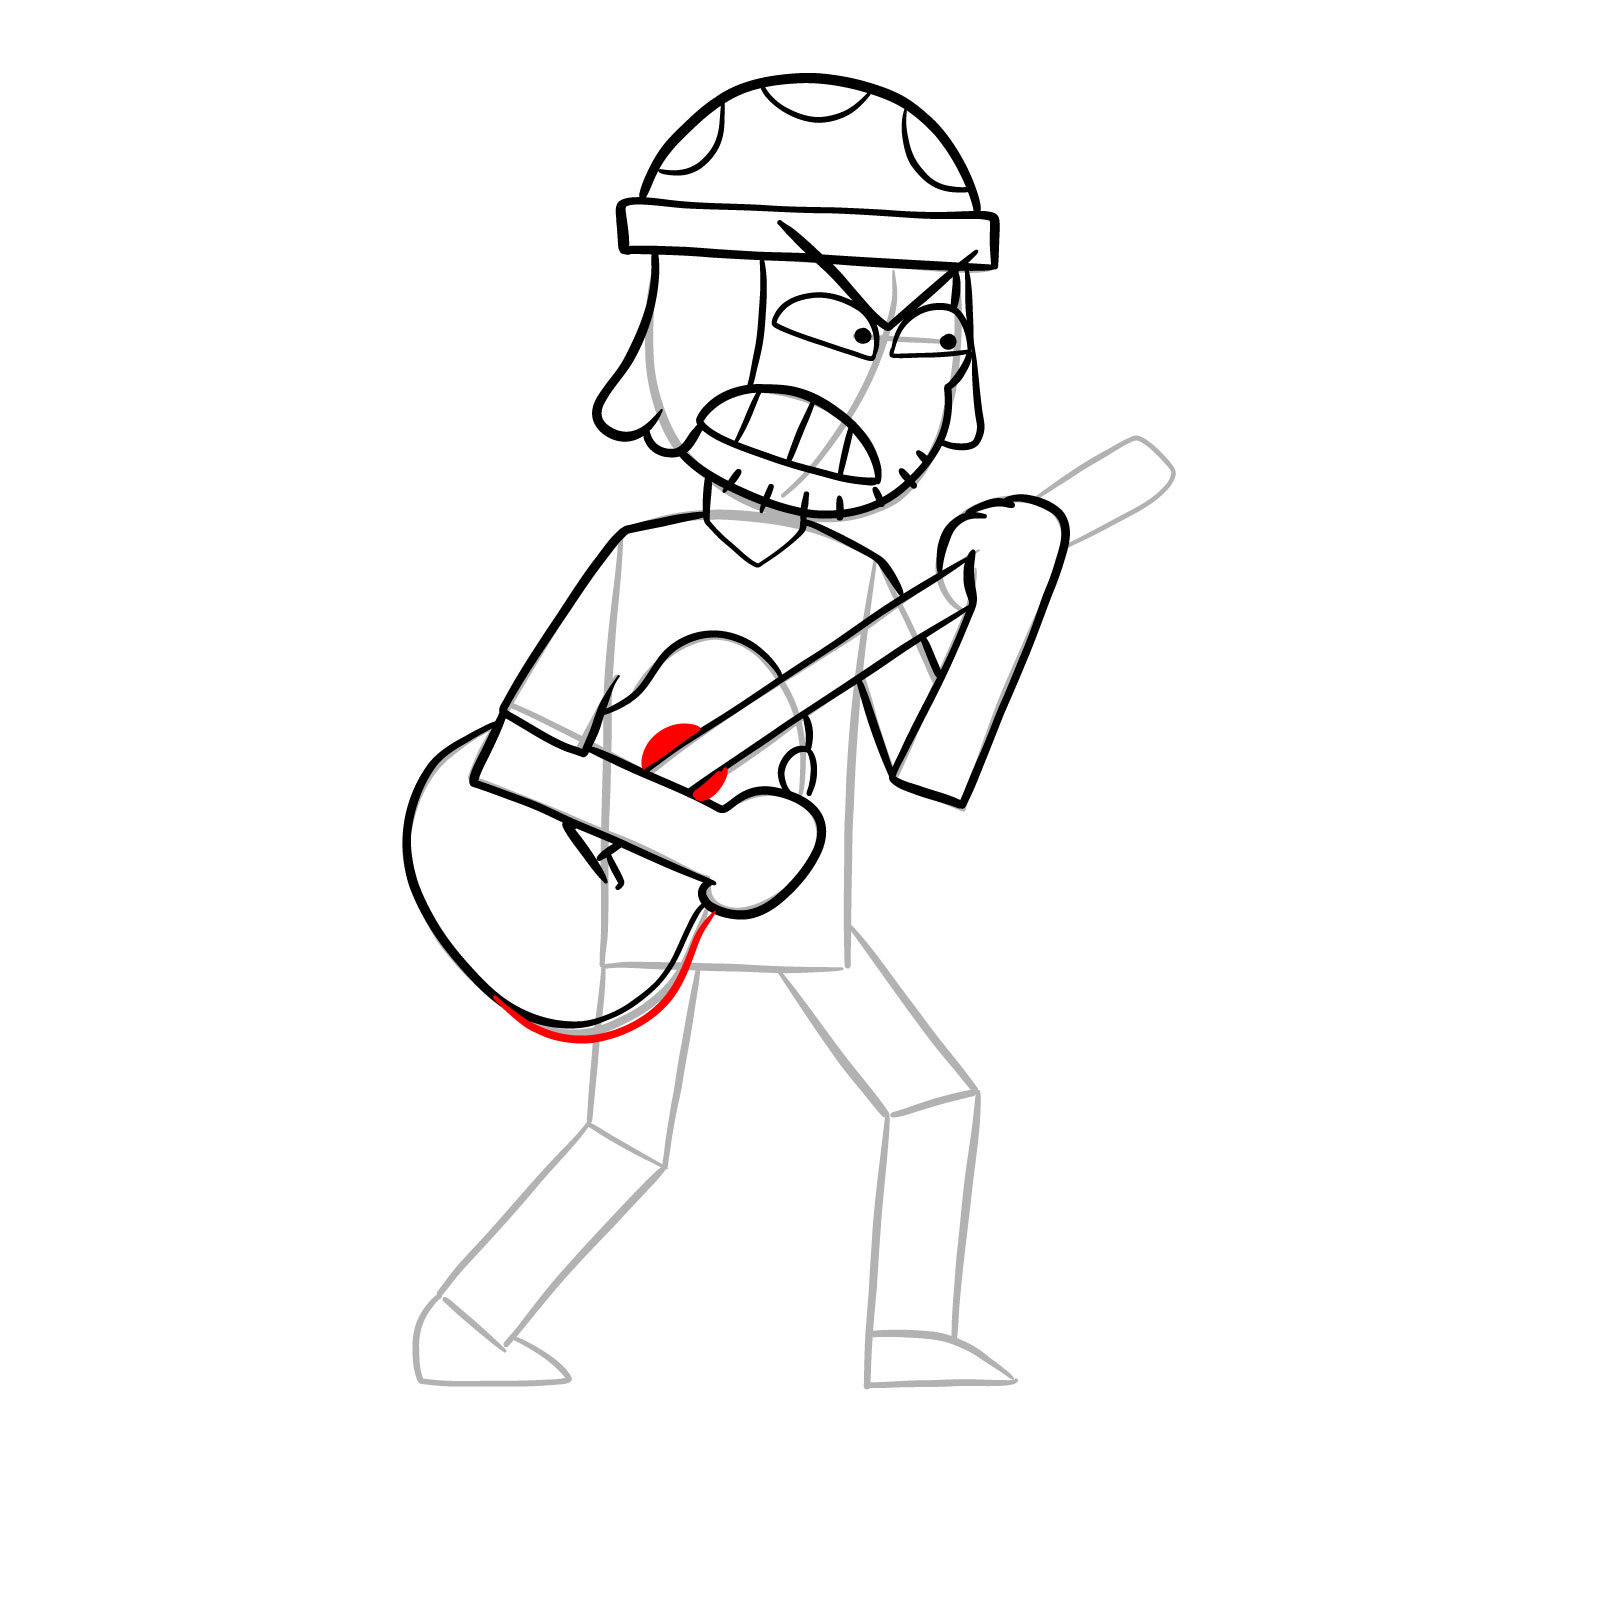 How to draw Suction Cup Man with a guitar - step 18